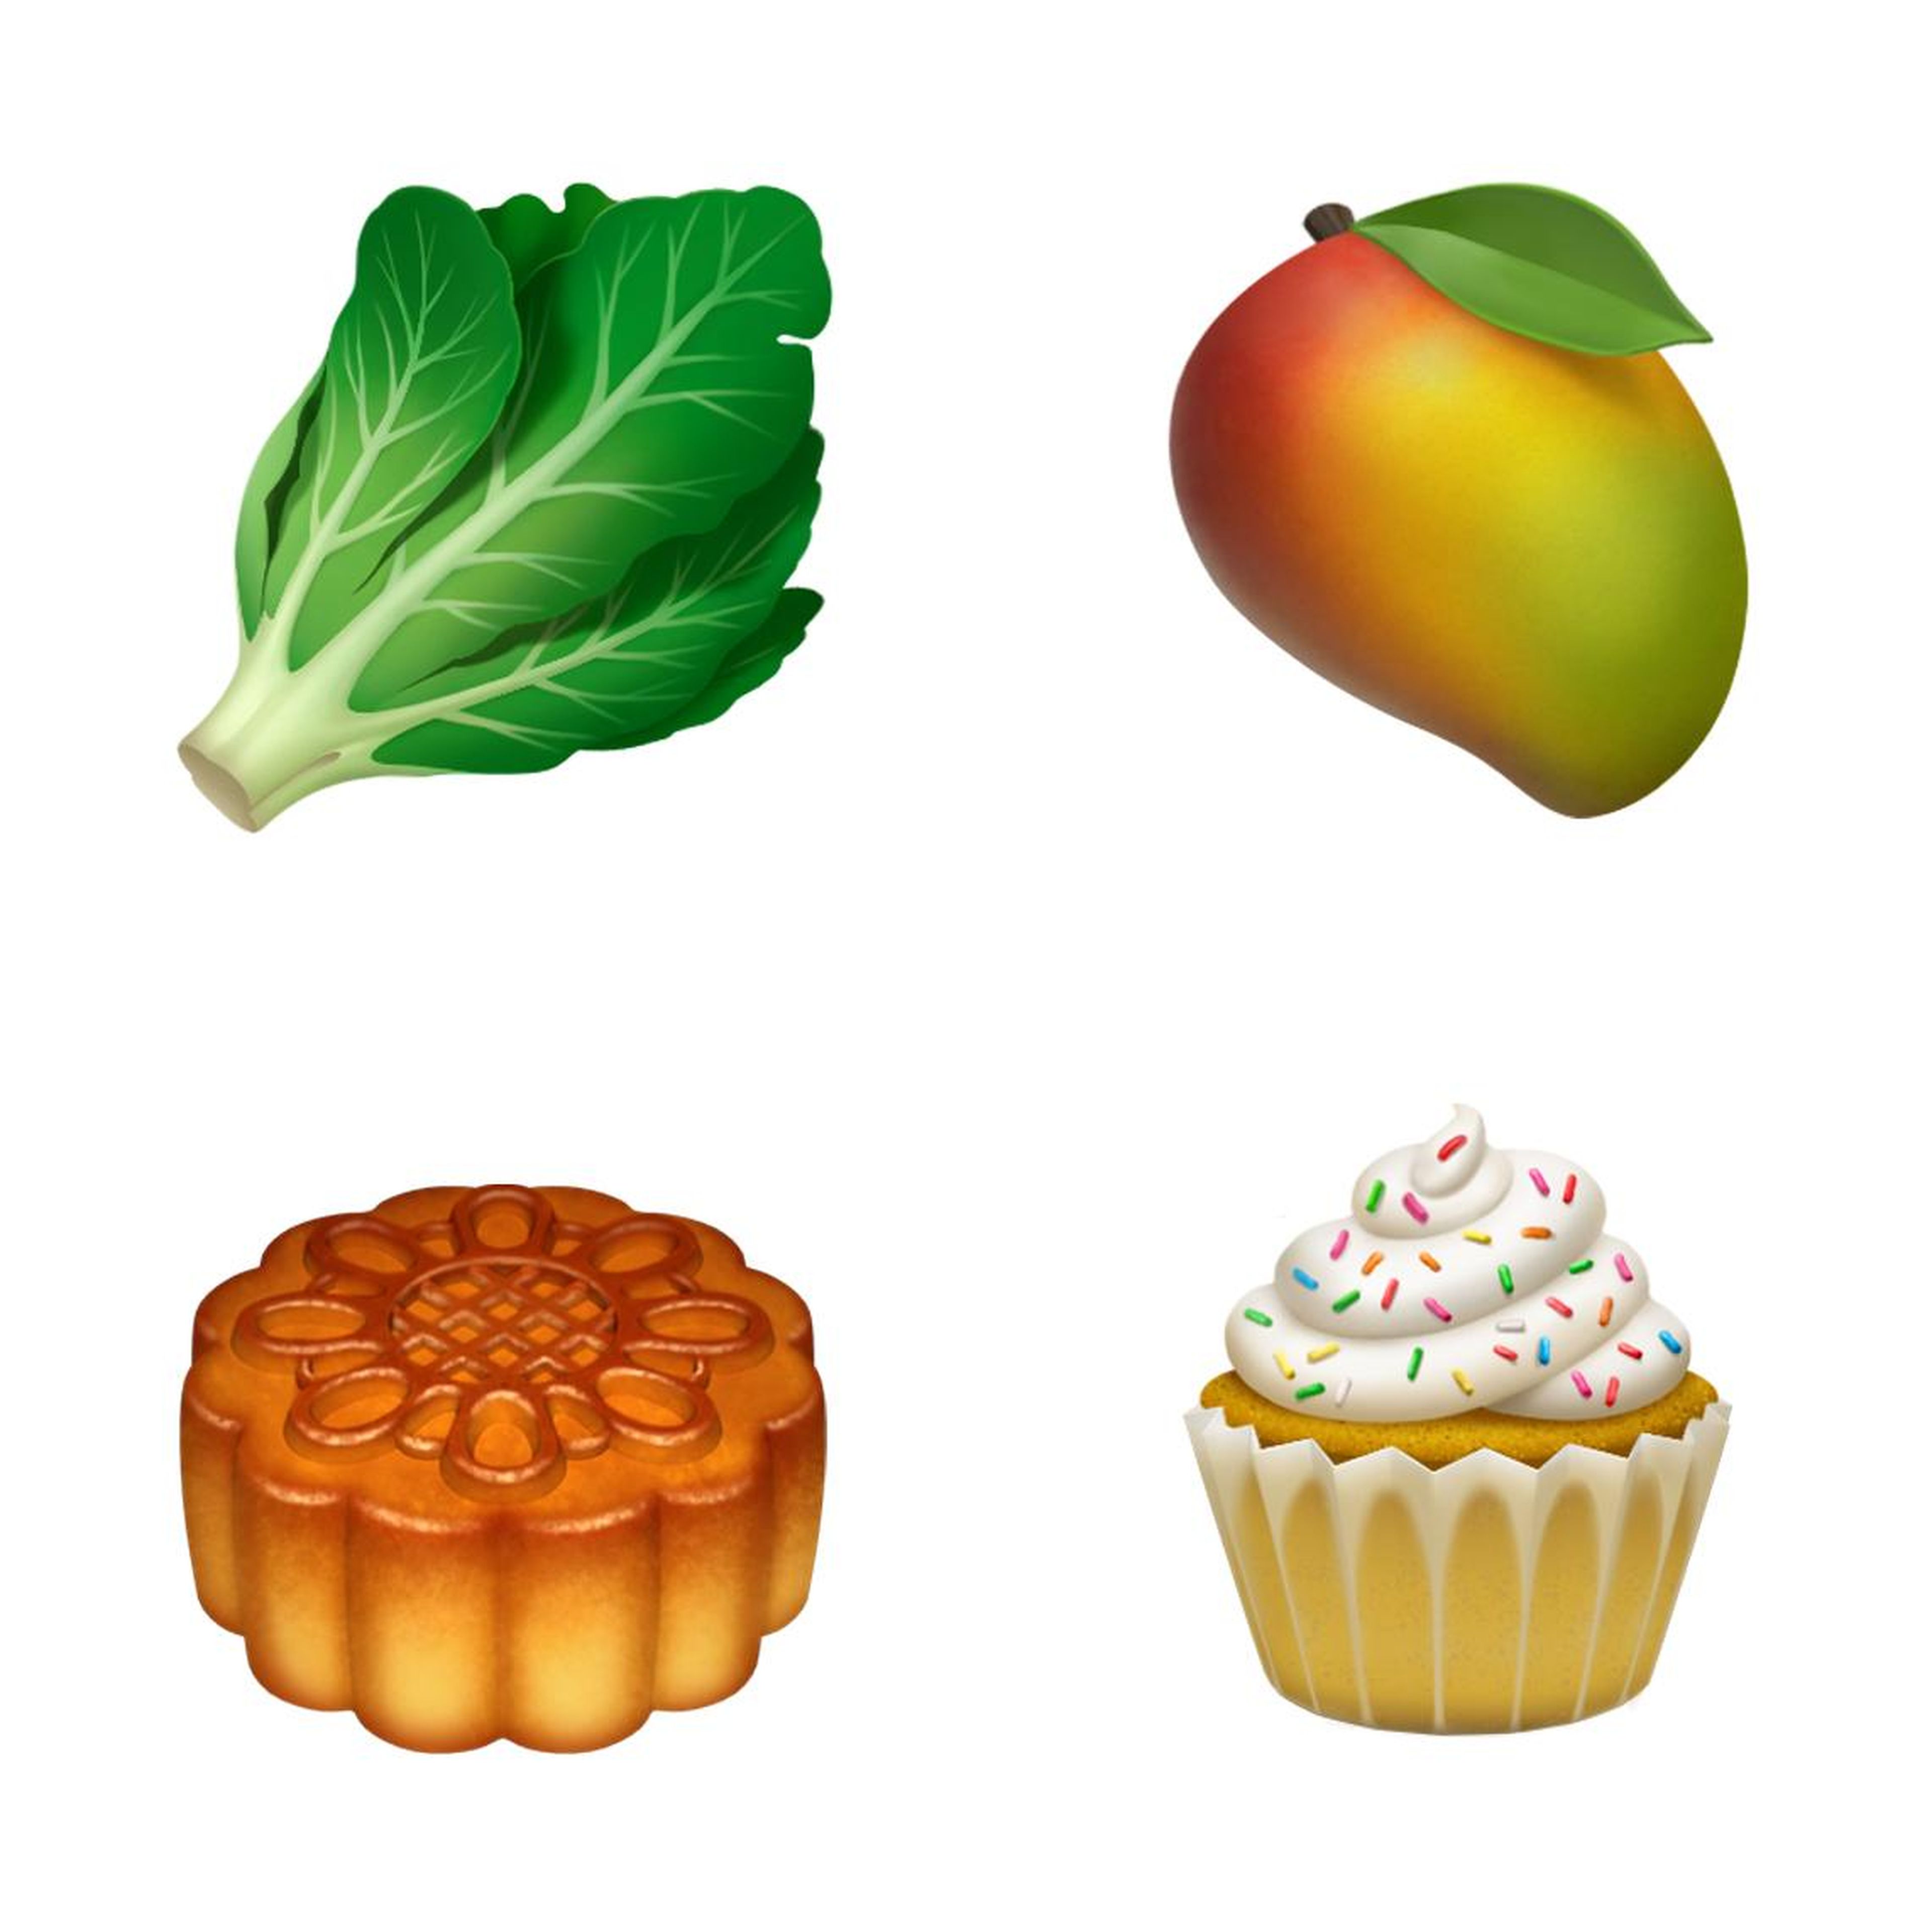 There are a few new foods coming, too: a cupcake, cake, lettuce, and a mango all made the cut.